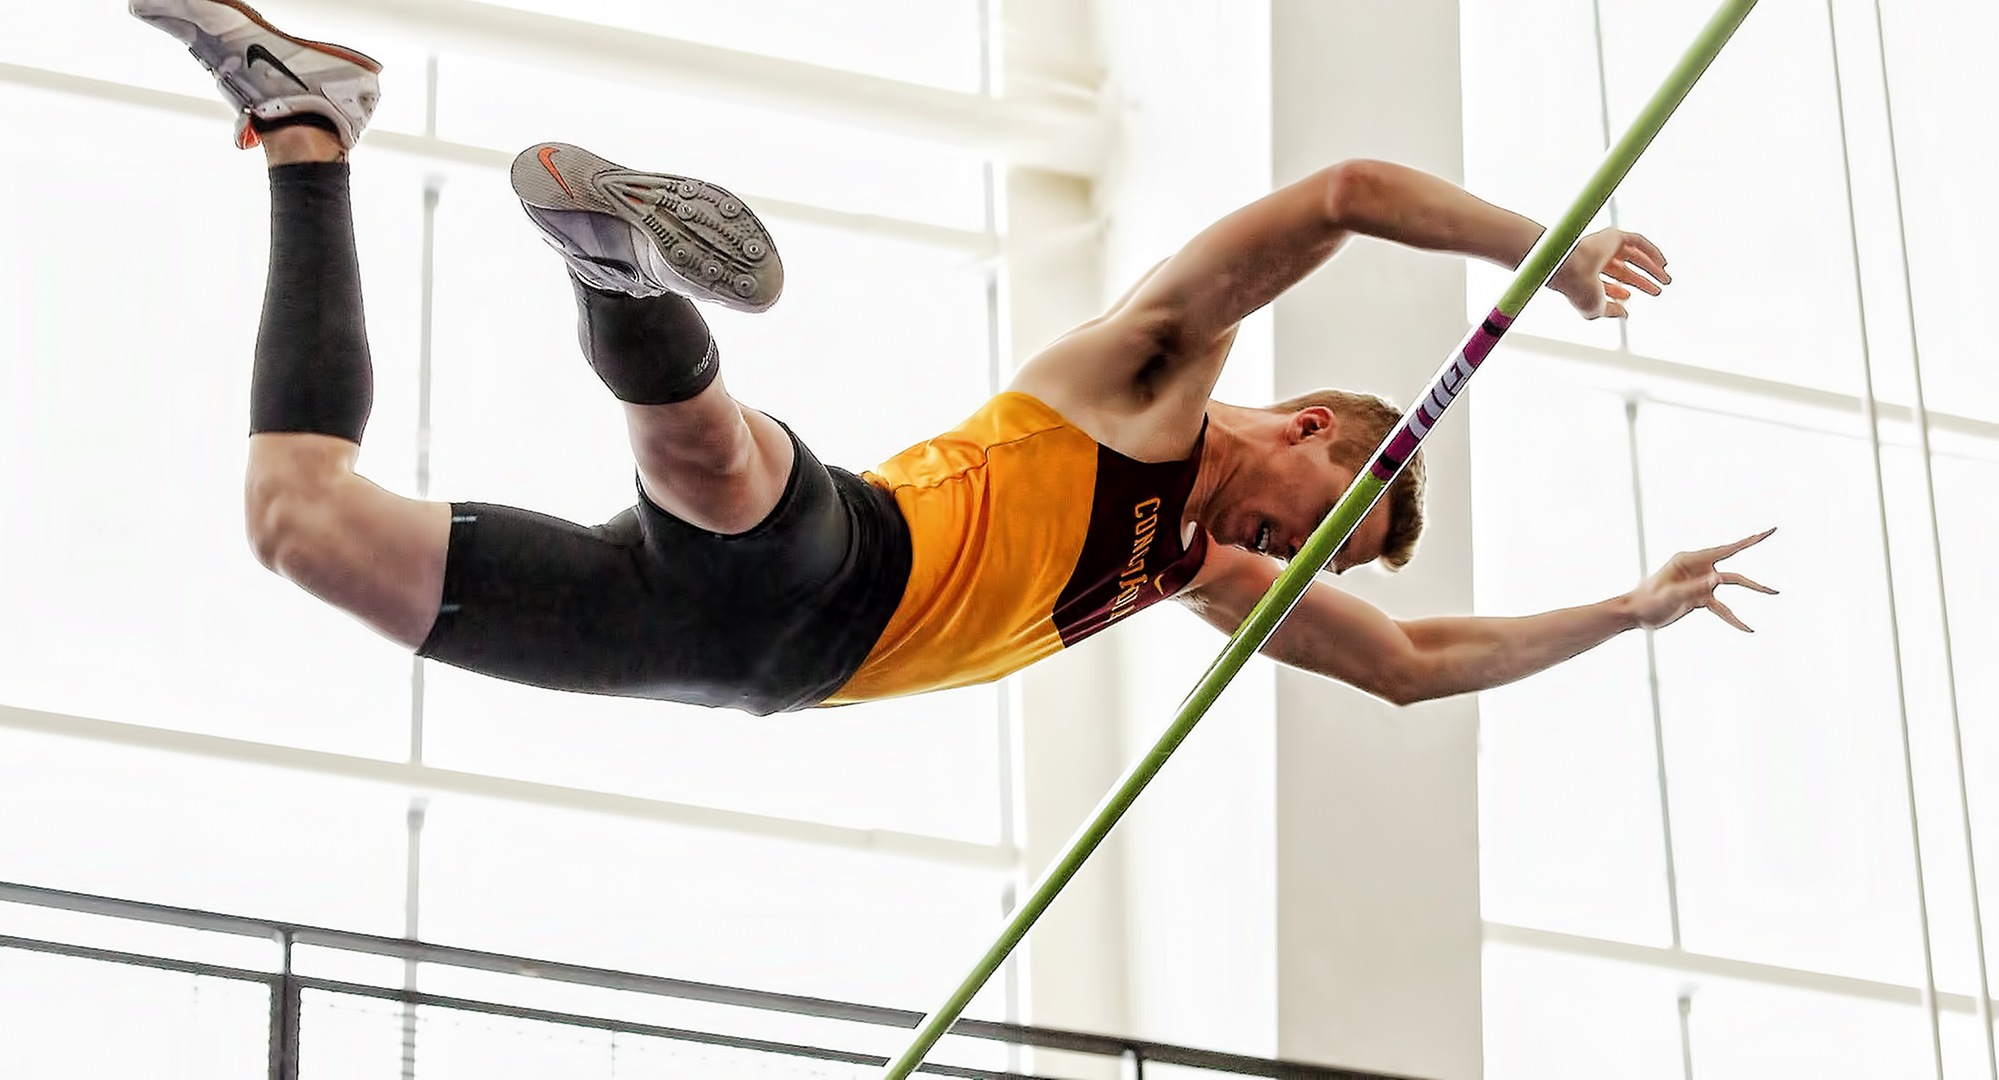 Senior Sam Haley sails over the bar in the pole vault at a career-best height of 14-06 on his way to a second-place finish at the MIAC Indoor Meet. (Photo courtesy of Nathan Lodermeier)